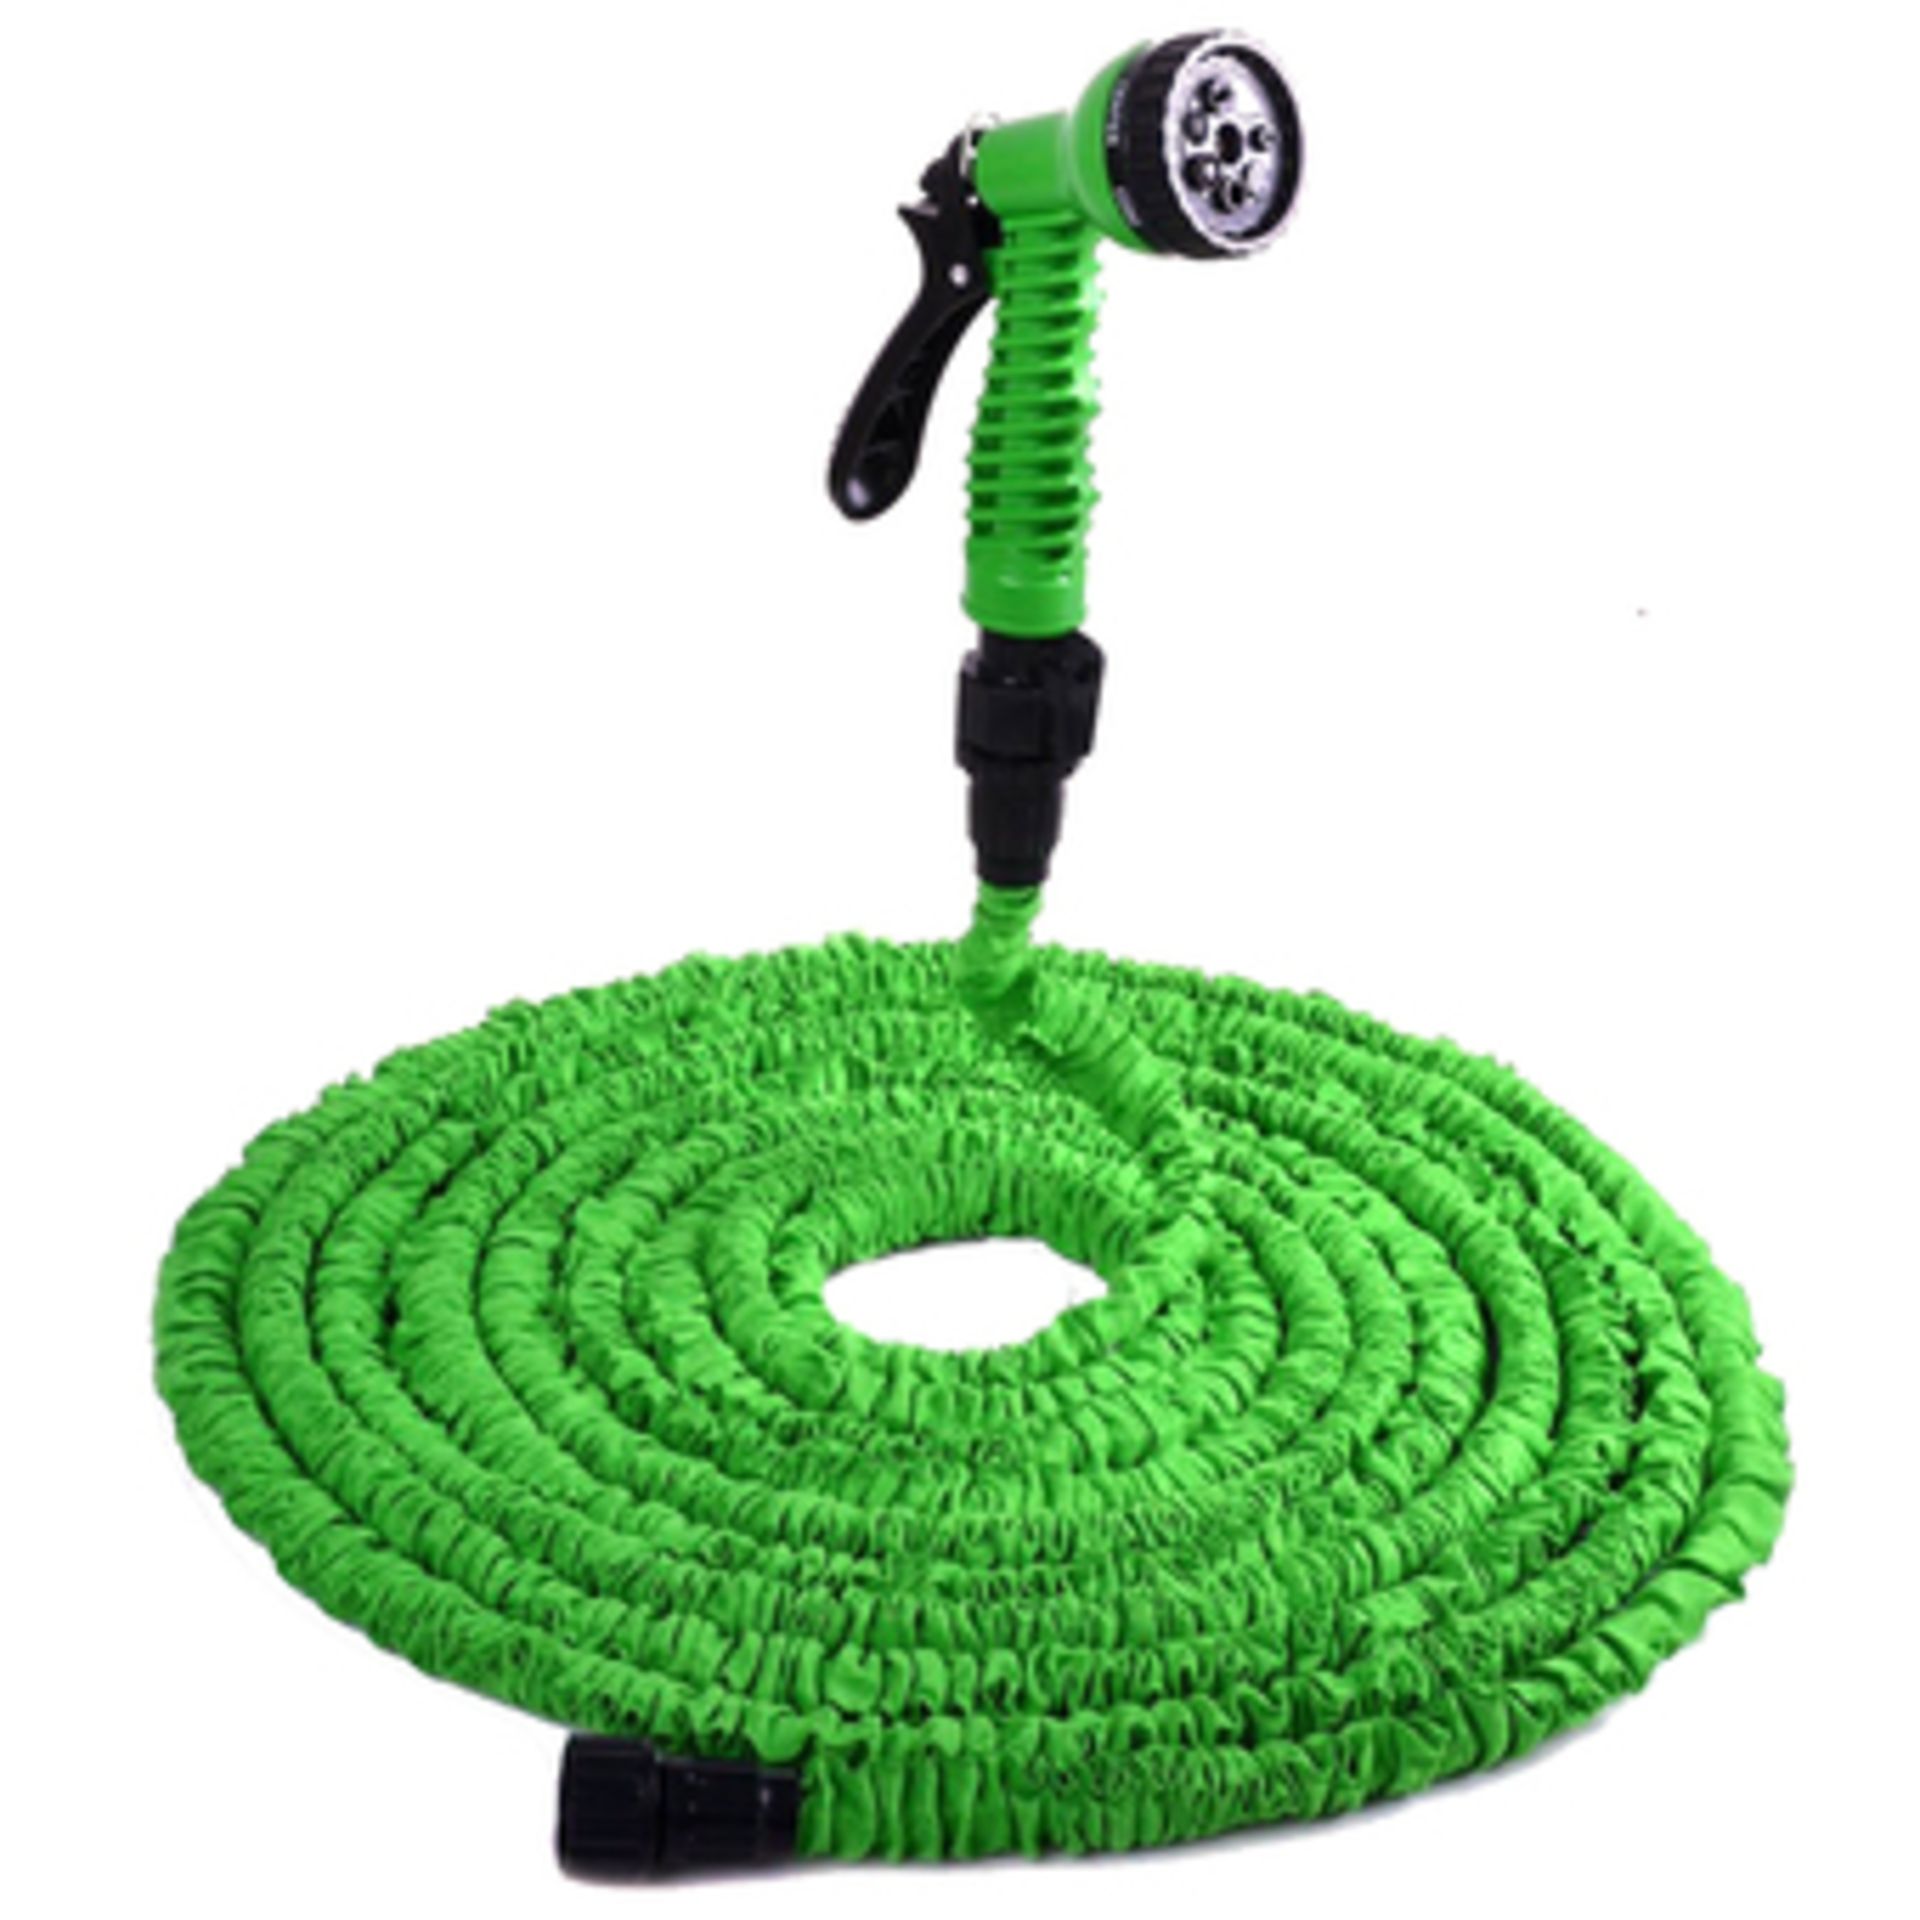 V Brand New 50 Foot Expanding Hose RRP £49.99 Colour may vary X 2 YOUR BID PRICE TO BE MULTIPLIED BY